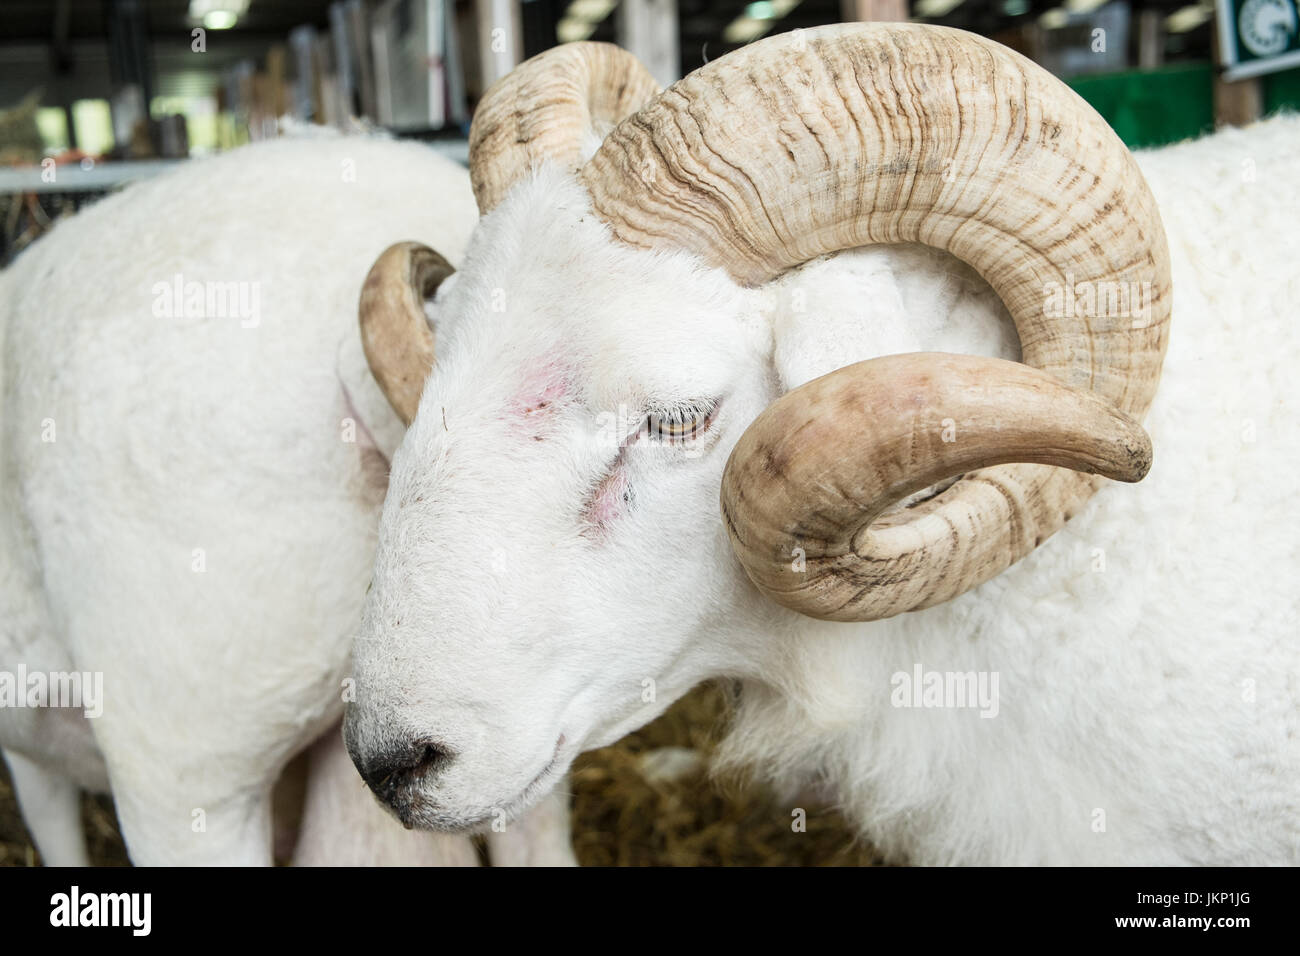 Builth Wells, Wales, UK. 24th July, 2017. Wiltshire Horn Sheep in its pen at The Royal Welsh Showground.Llanelwedd, Builth Wells, Powys, Wales, UK.Sunny opening day of the 4 day event, which is the largest of its kind in Europe. Credit: Paul Quayle/Alamy Live News Stock Photo